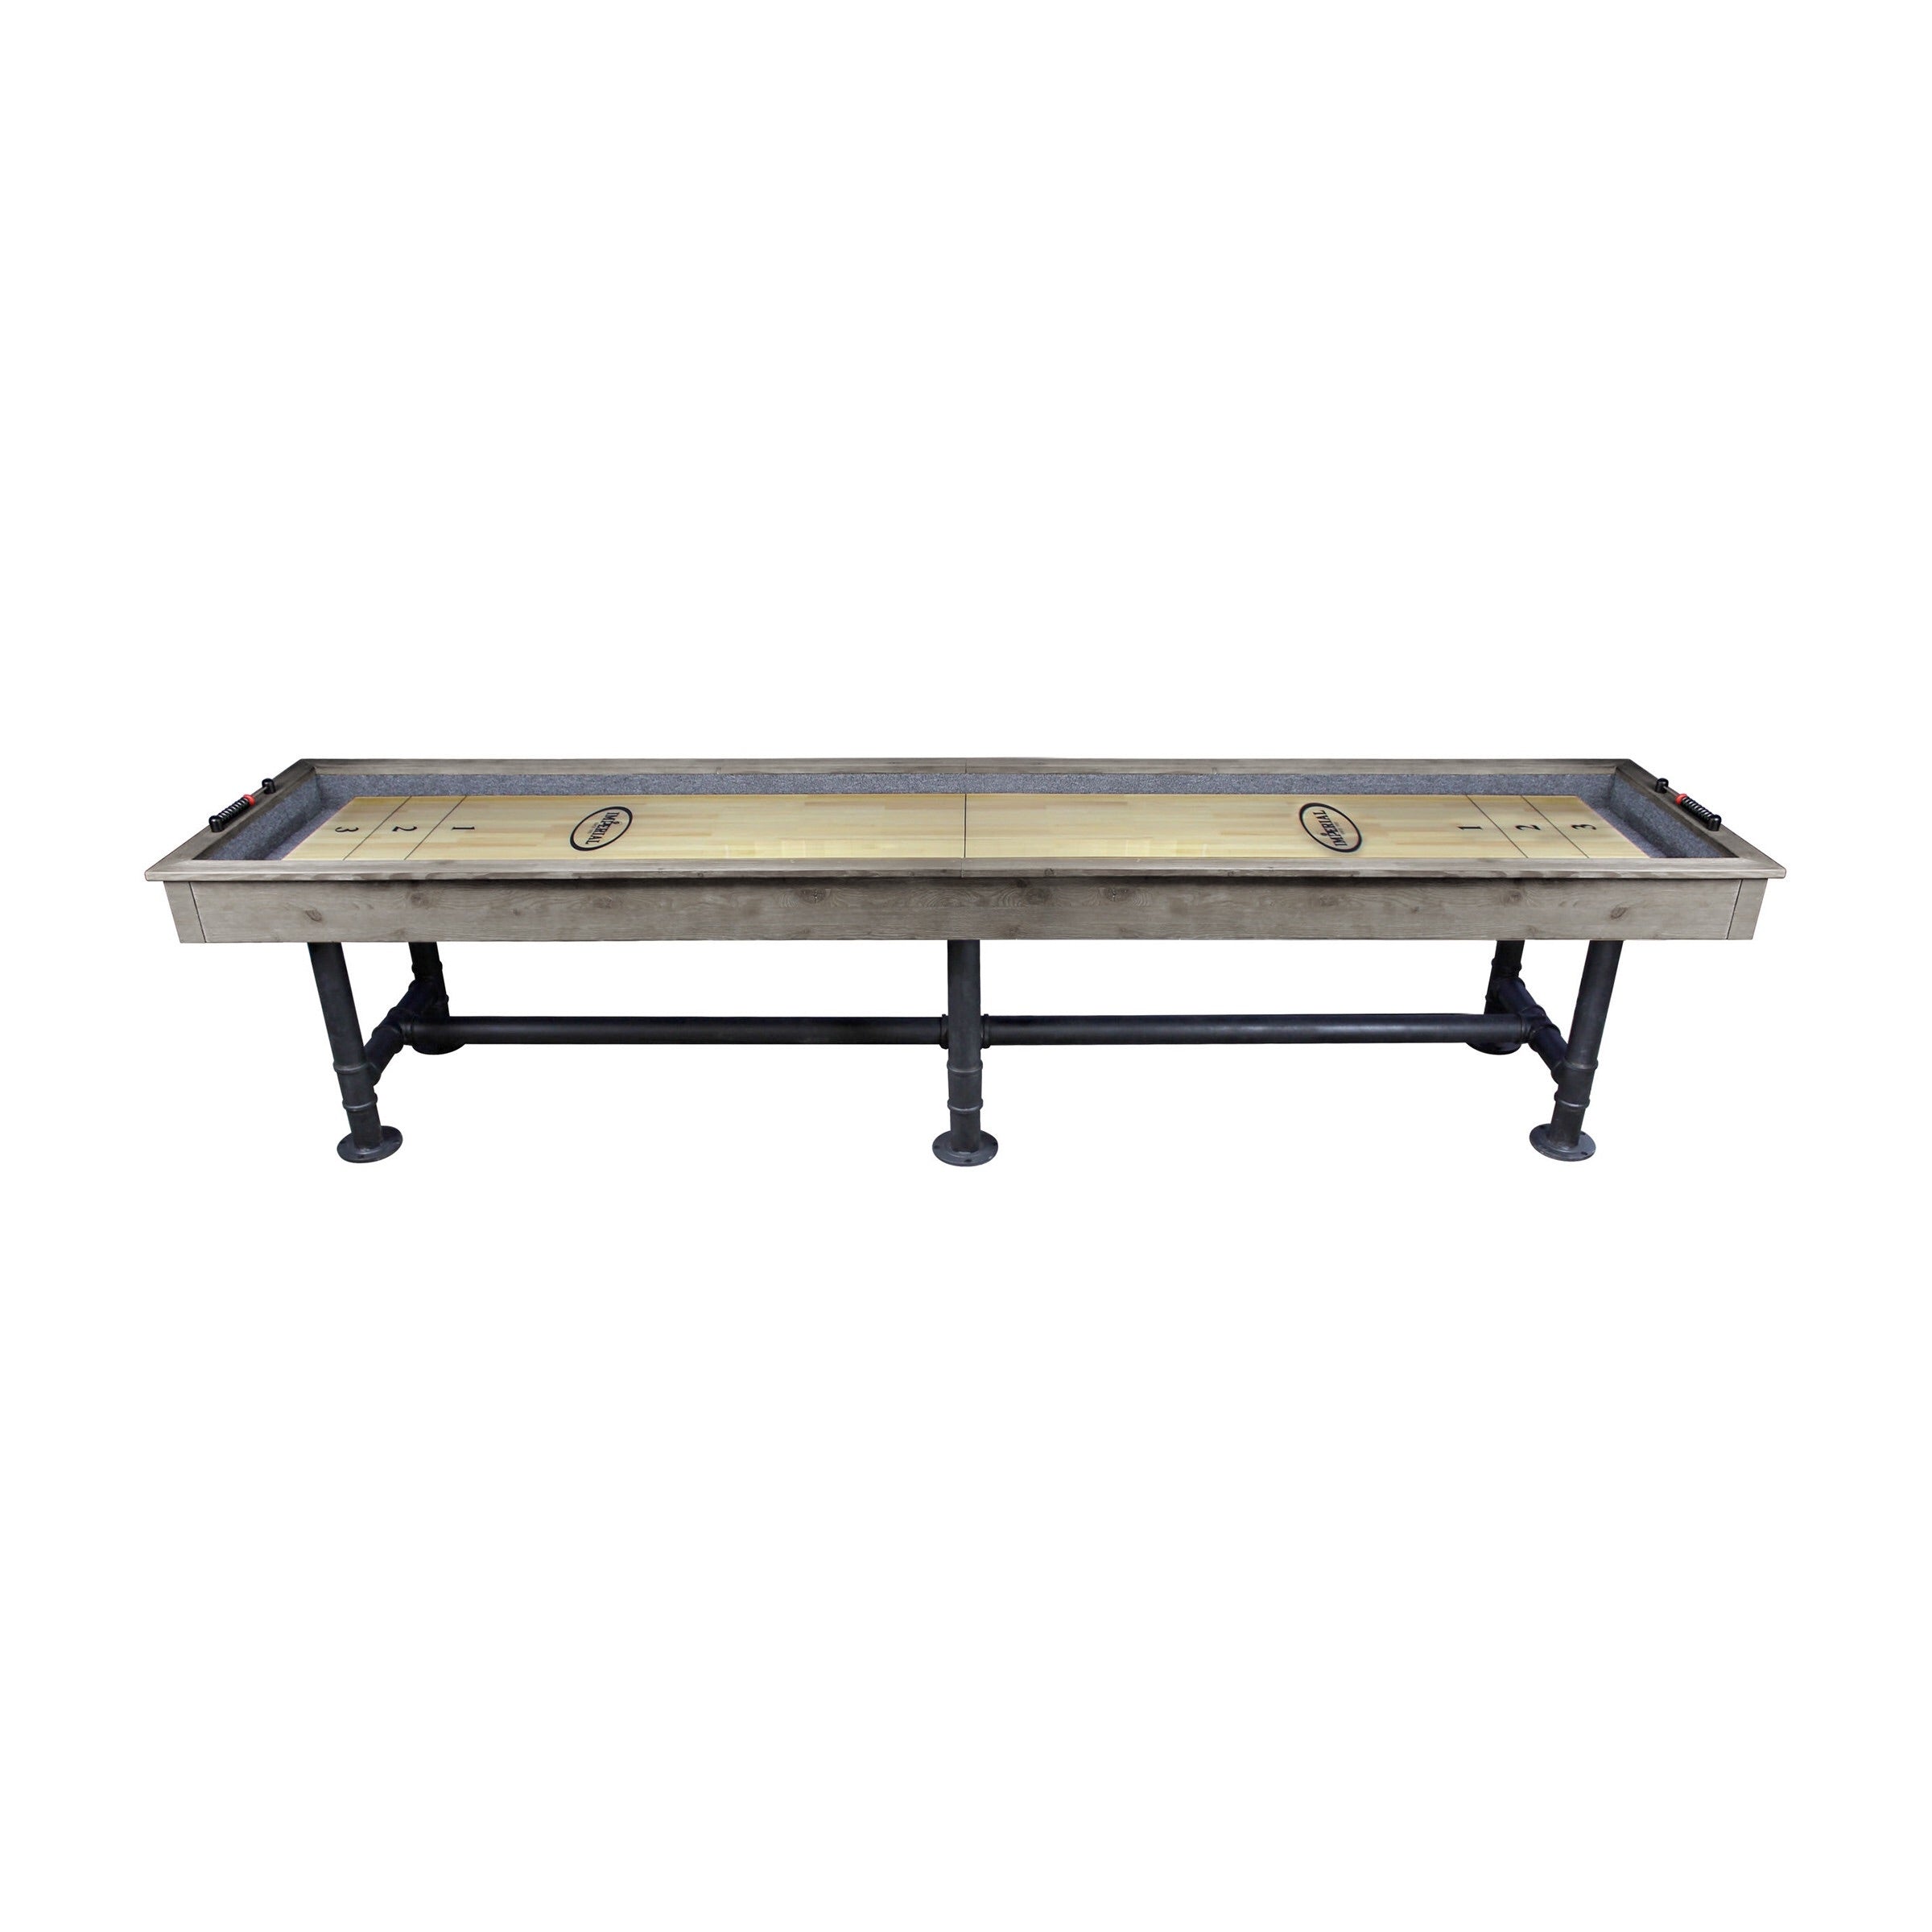 Bedford 9-FT. Shuffleboard Table; Silver Mist by Imperial